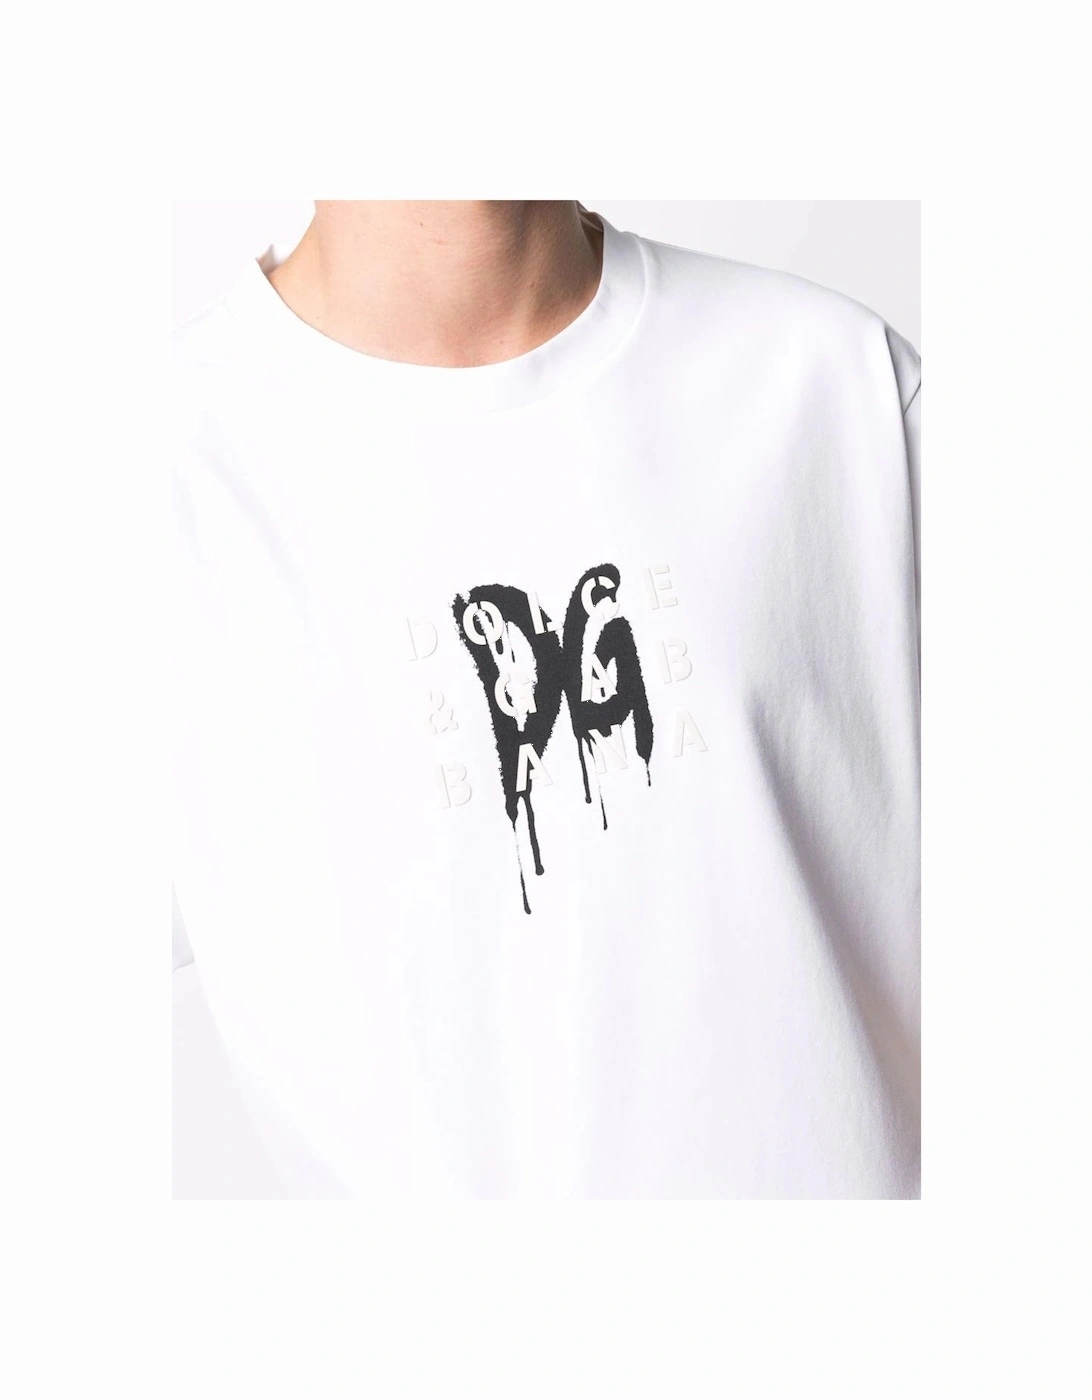 Graffiti Logo Print with Rubber effect T-Shirt in White